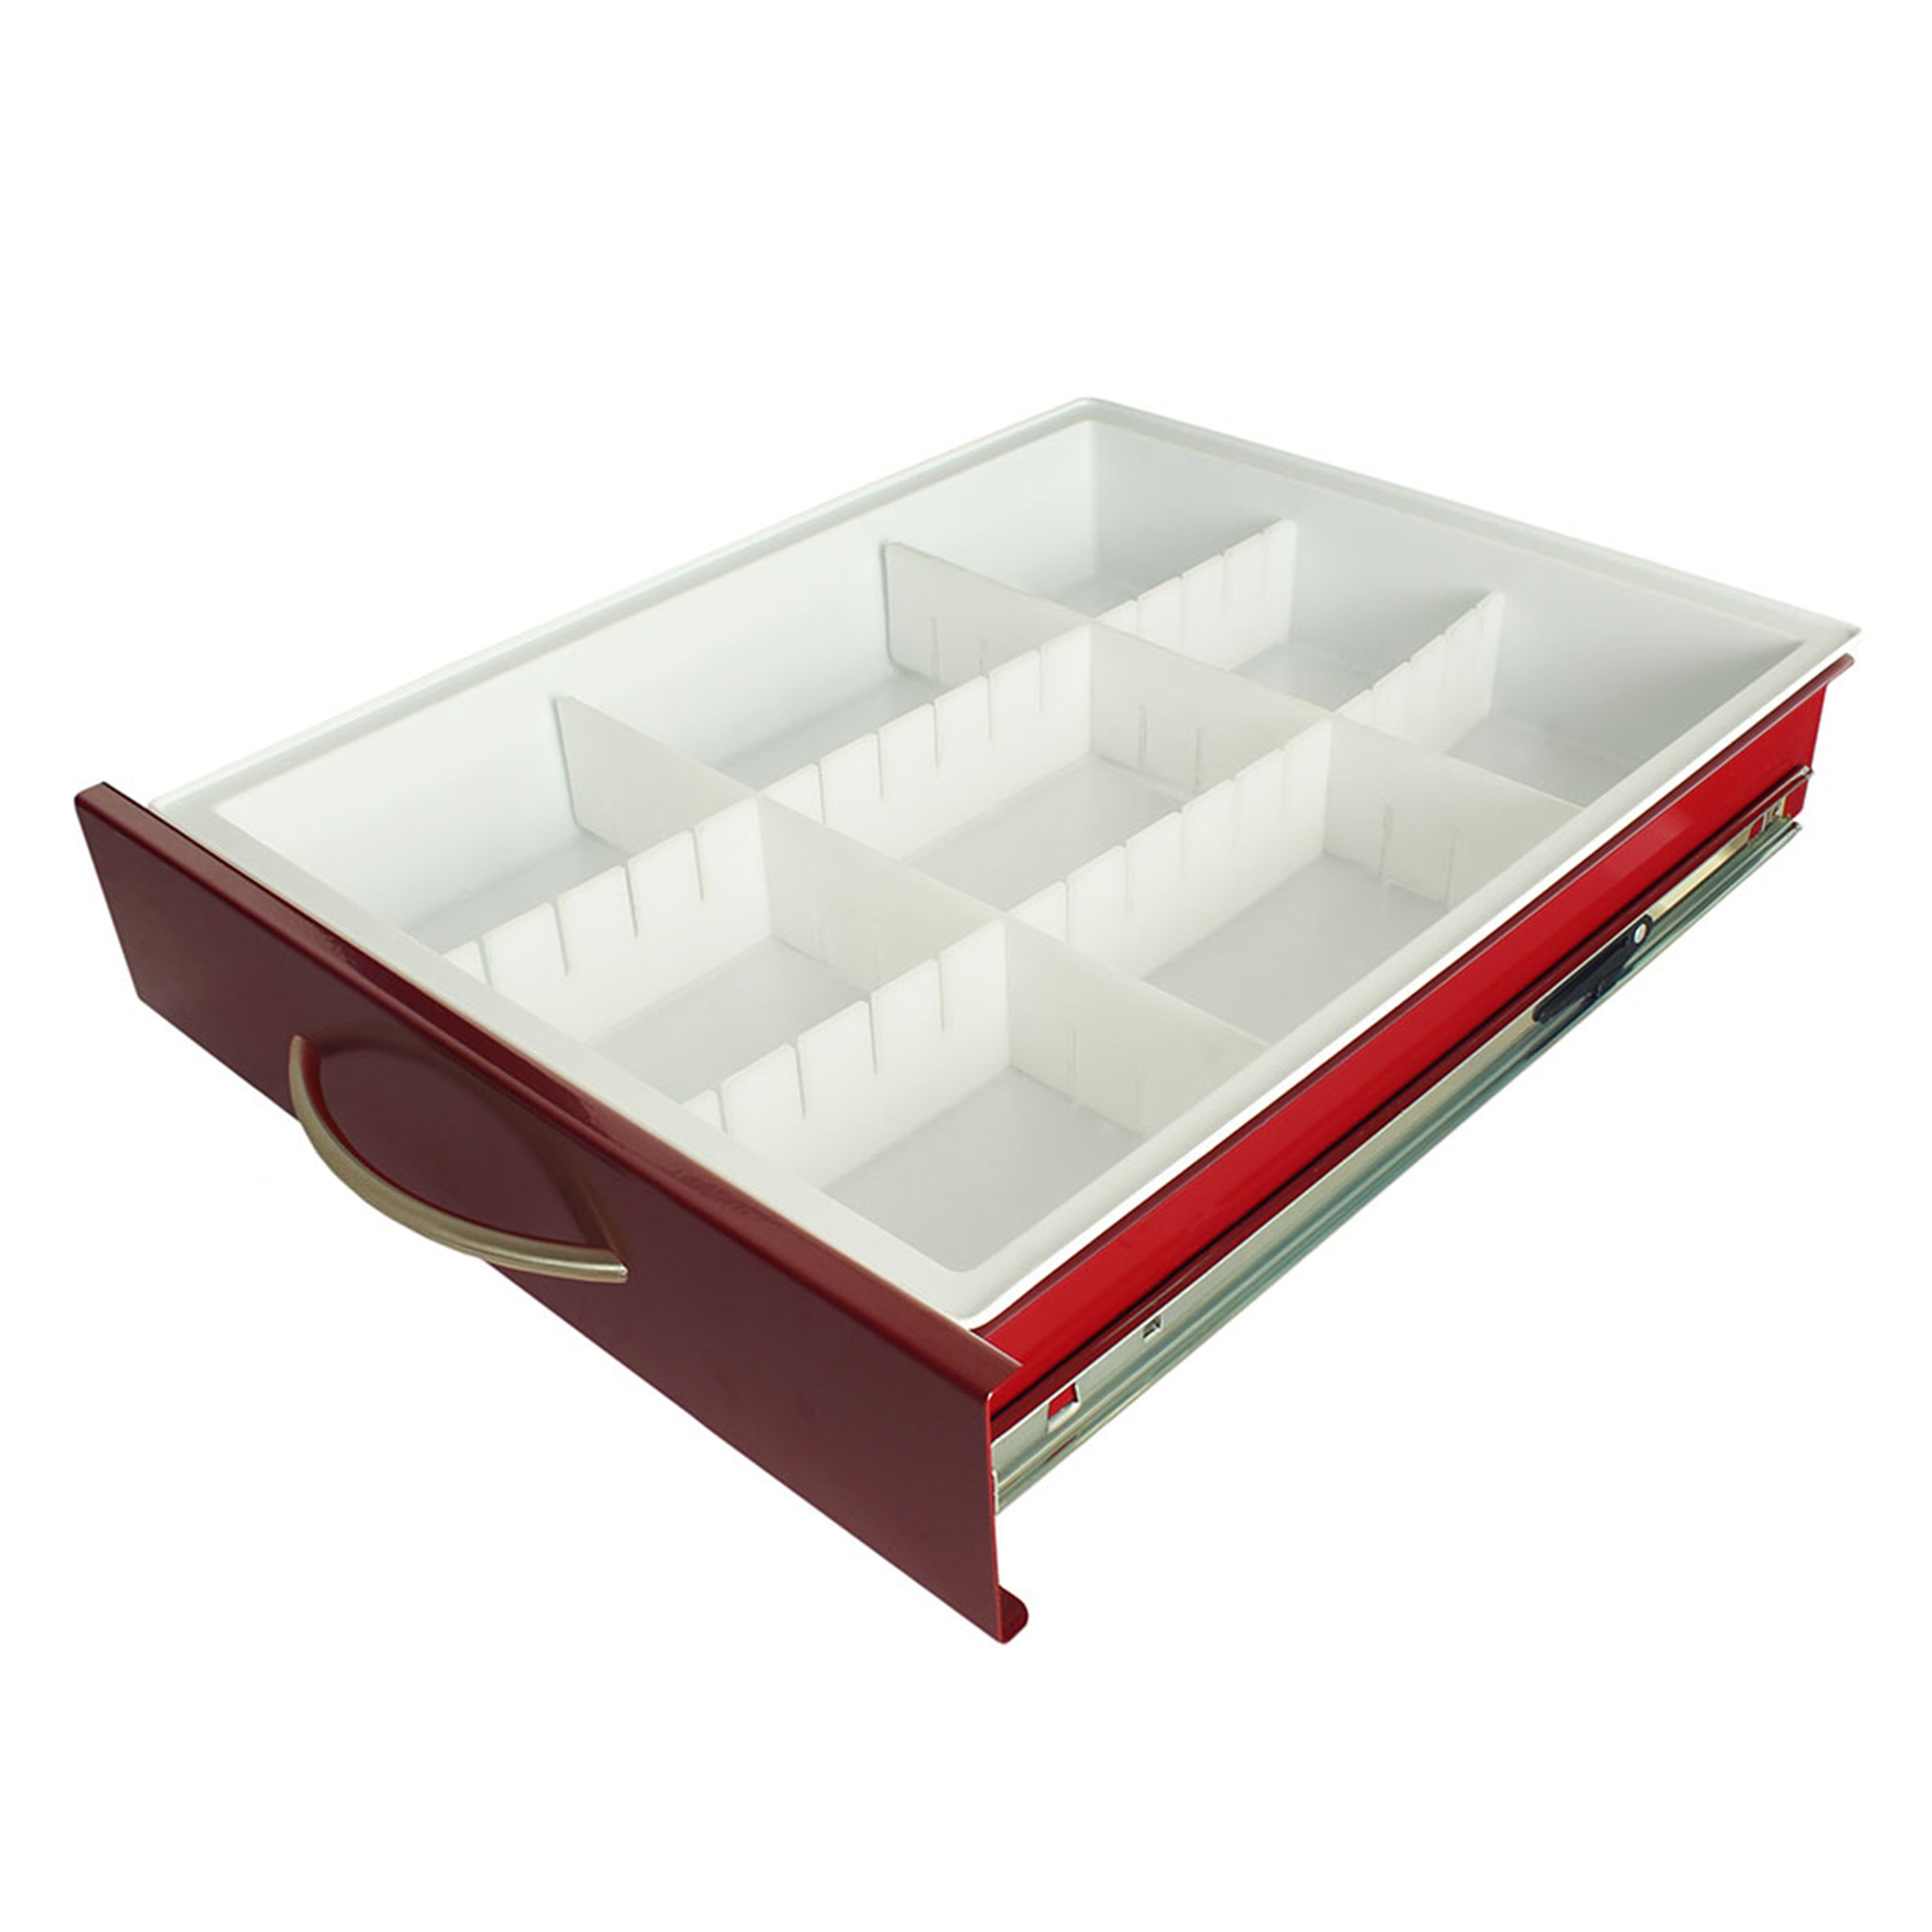 18 in. High Tray Dividers with clips - Fits in B9FHD, B12, B12FHD, or B15